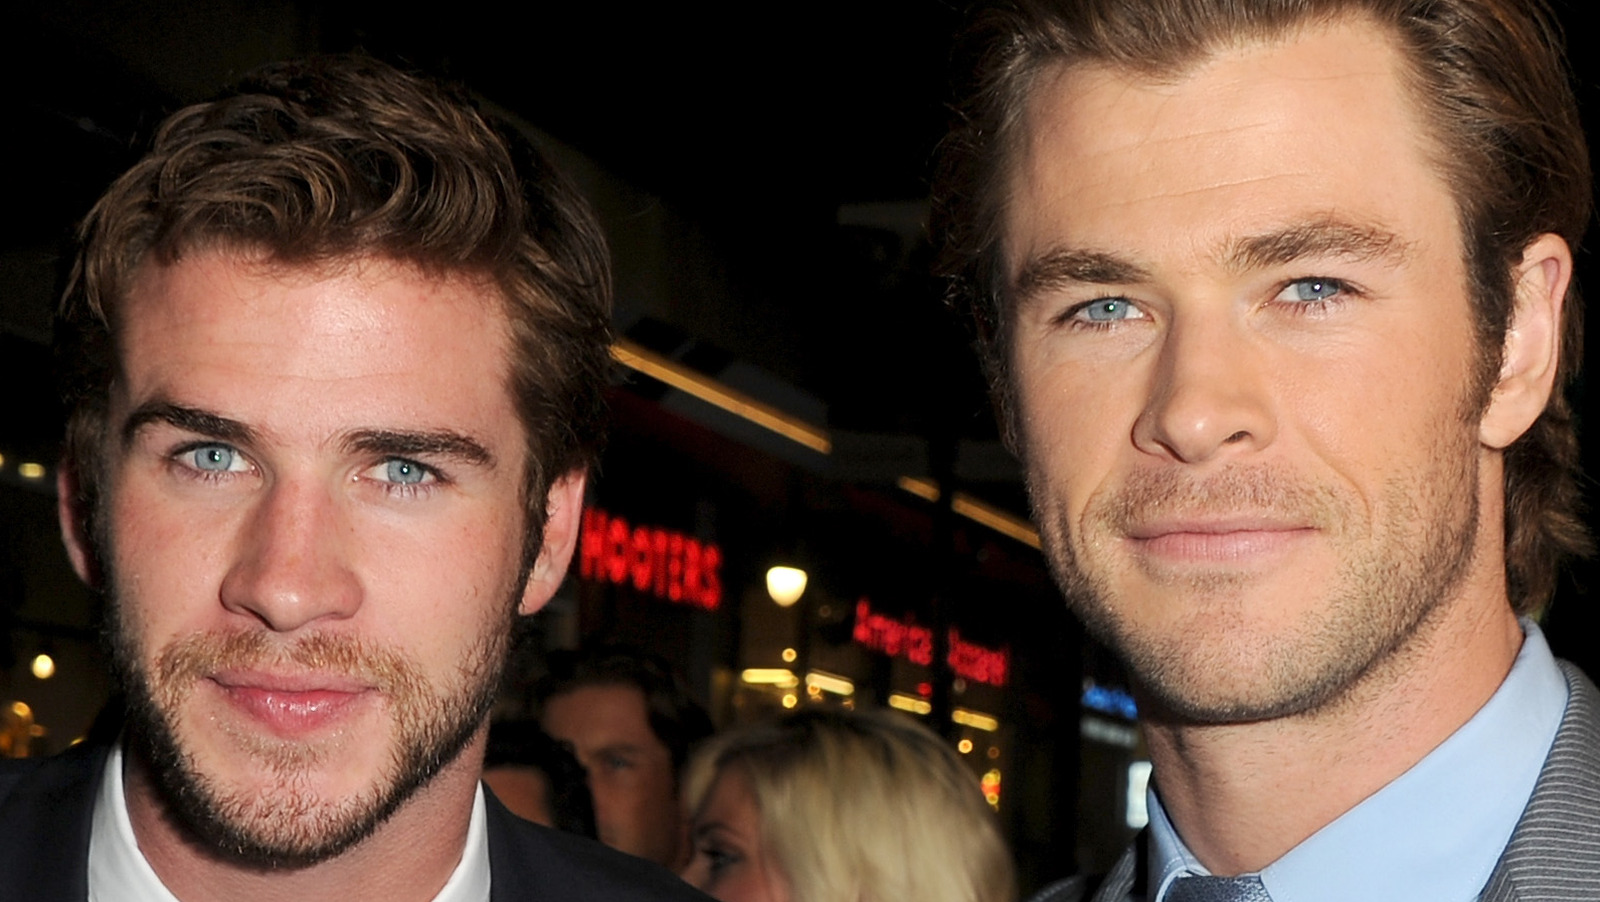 The Truth About Chris Hemsworth And Liam Hemsworth's Relationship